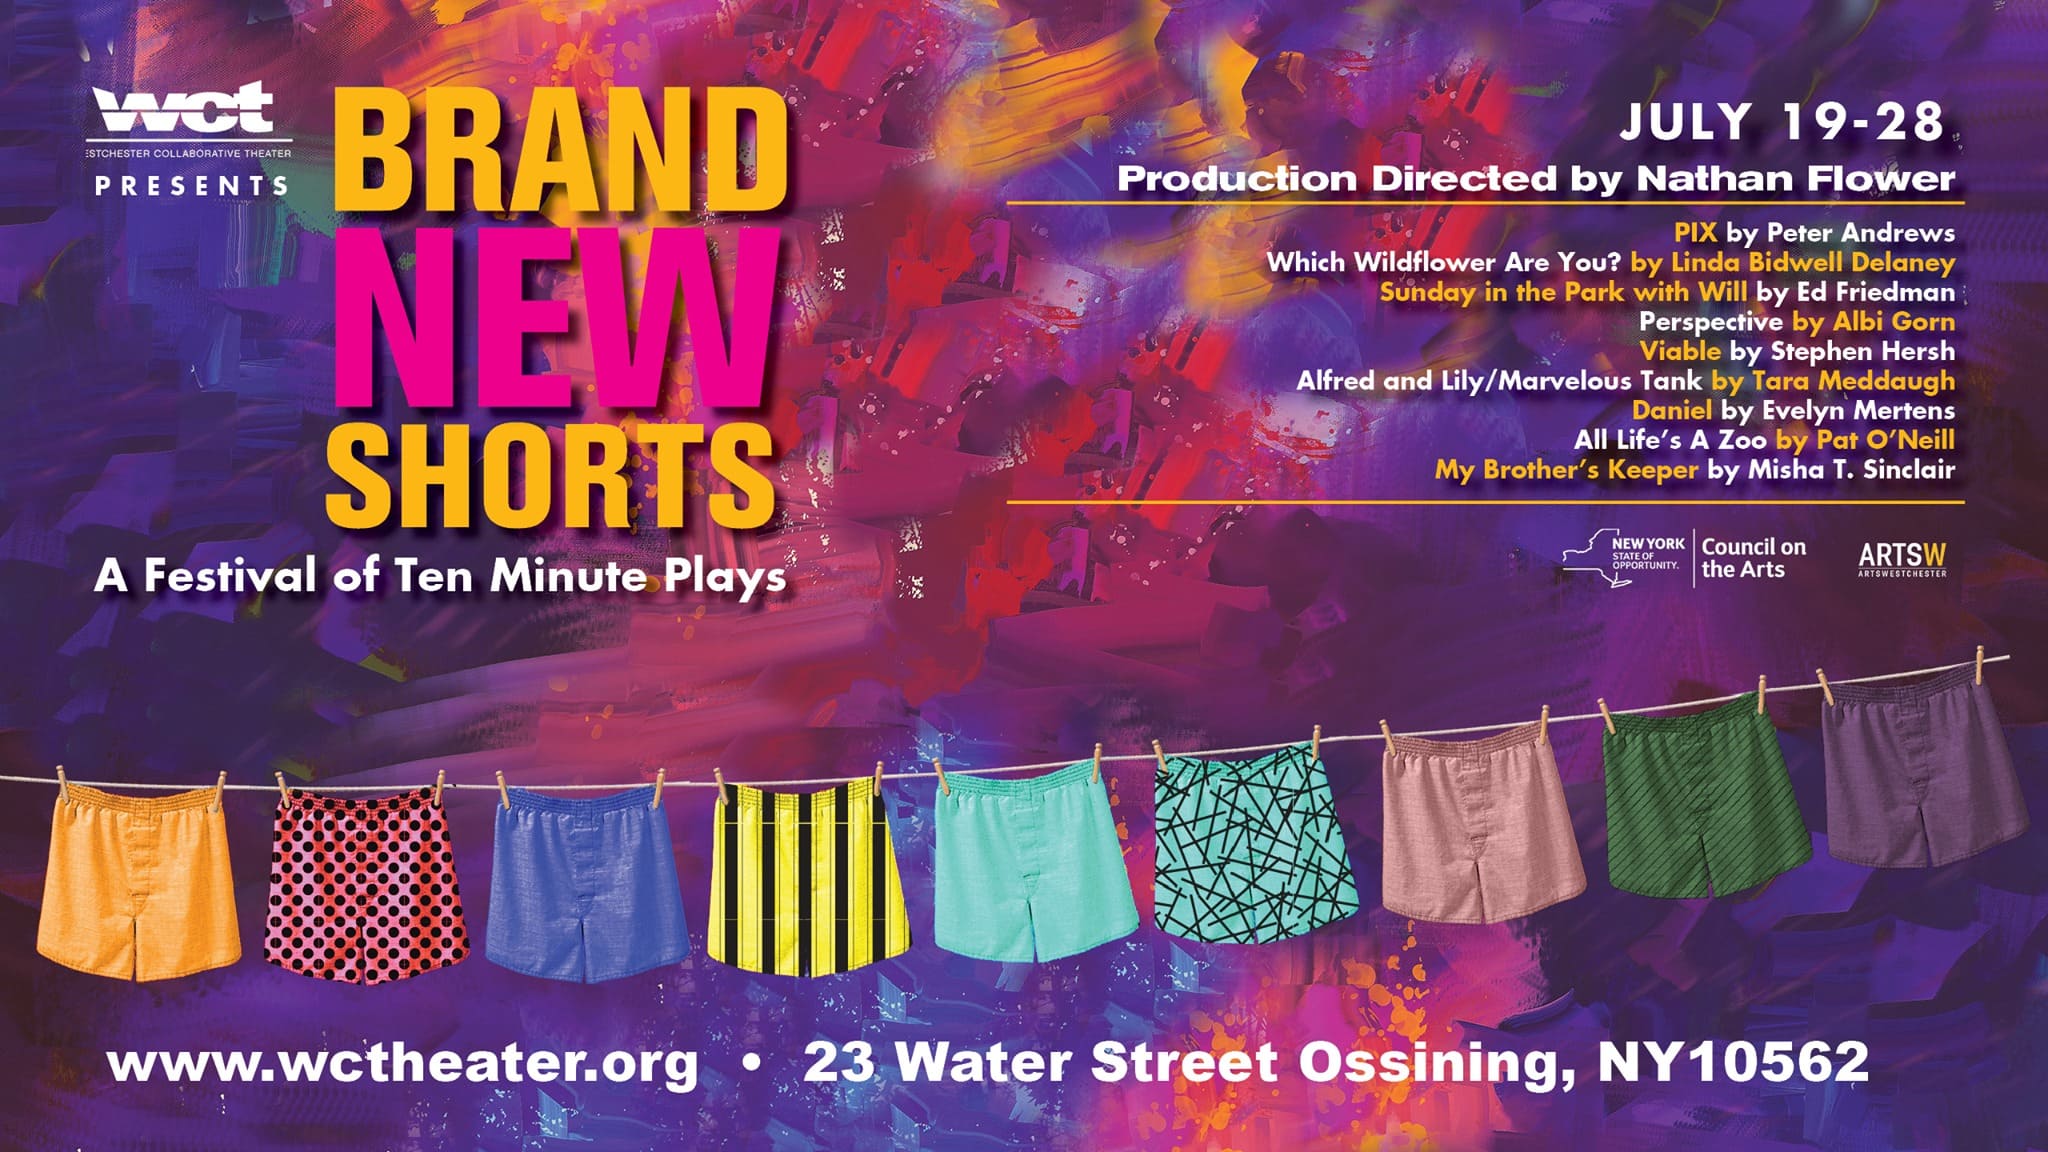 WCT Presents "Brand New Shorts"